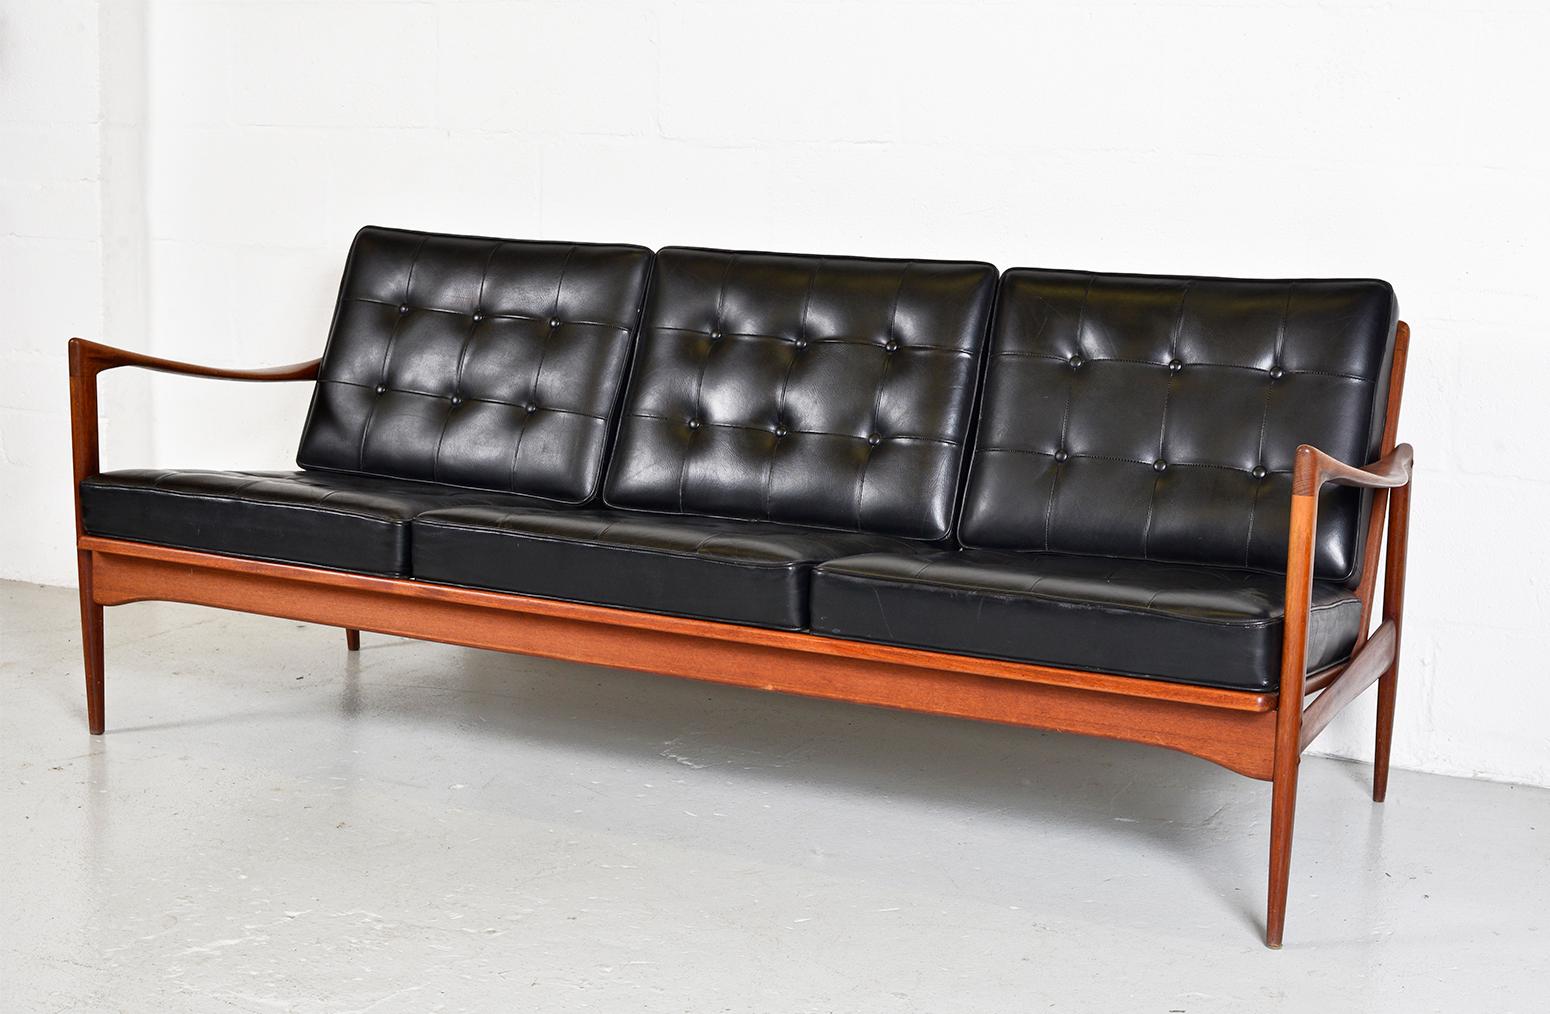 This highly sought after three-seat ‘Kandidaten’ sofa was designed by Ib Kofod-Larsen for OPE Möbler in the 1960s. Crafted to the very highest standards, its solid teak frame, open-sided, slat-back shape and sweeping armrests combined, will bring a